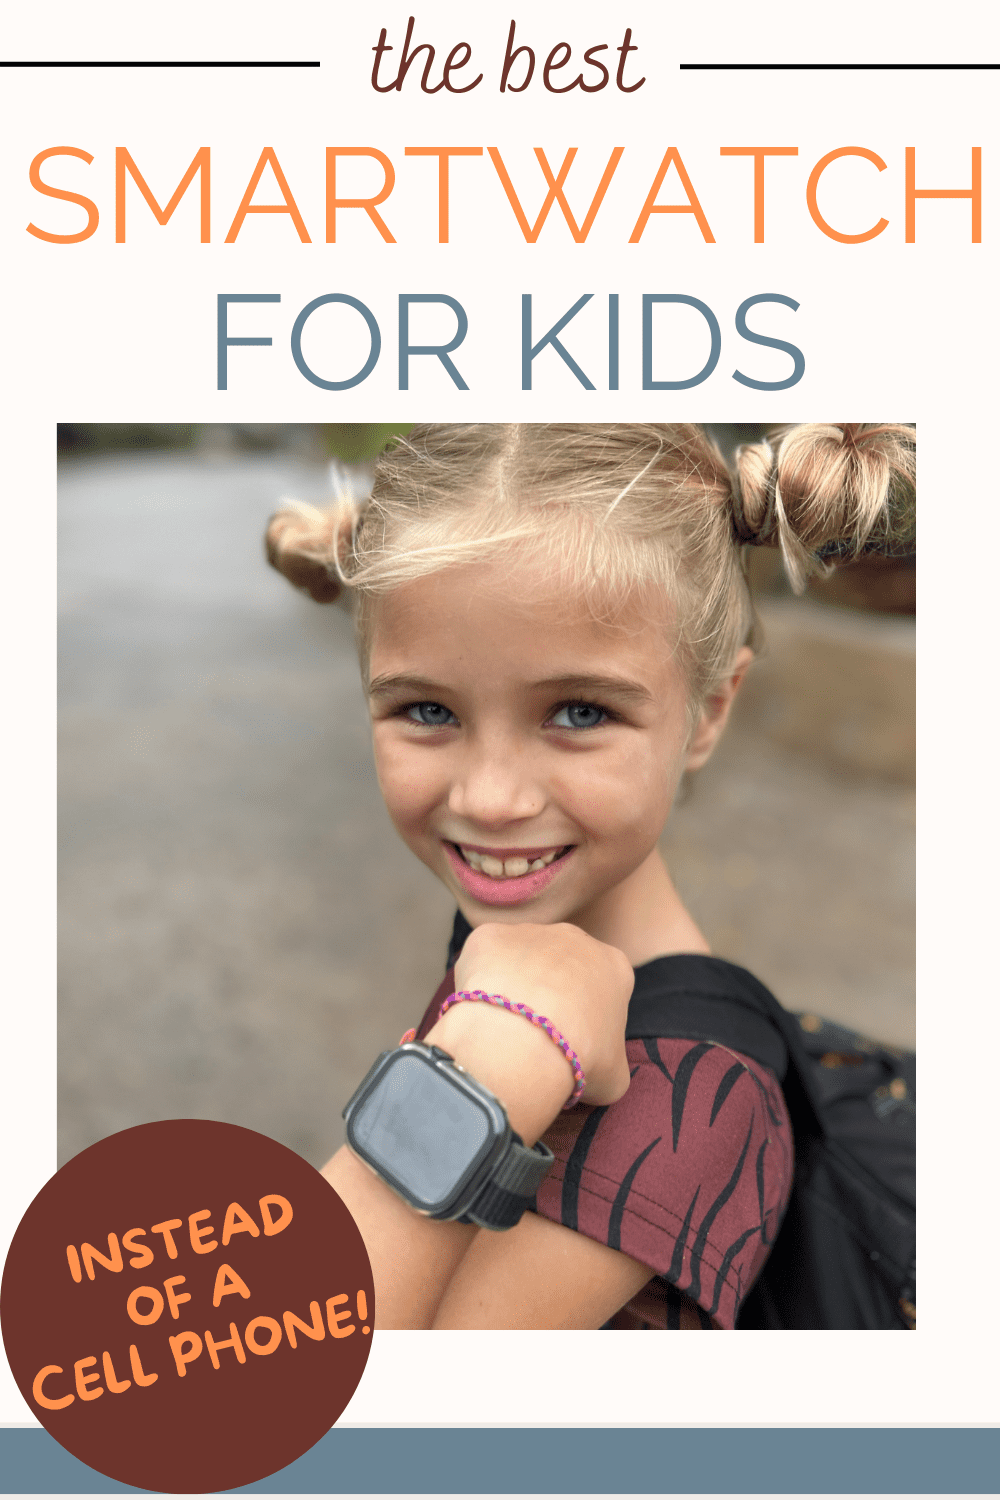 Looking for a Stress-Free Phone Alternative for Tweens? Here's The Best Smartwatch for Tweens and Kids that Parents will Love!